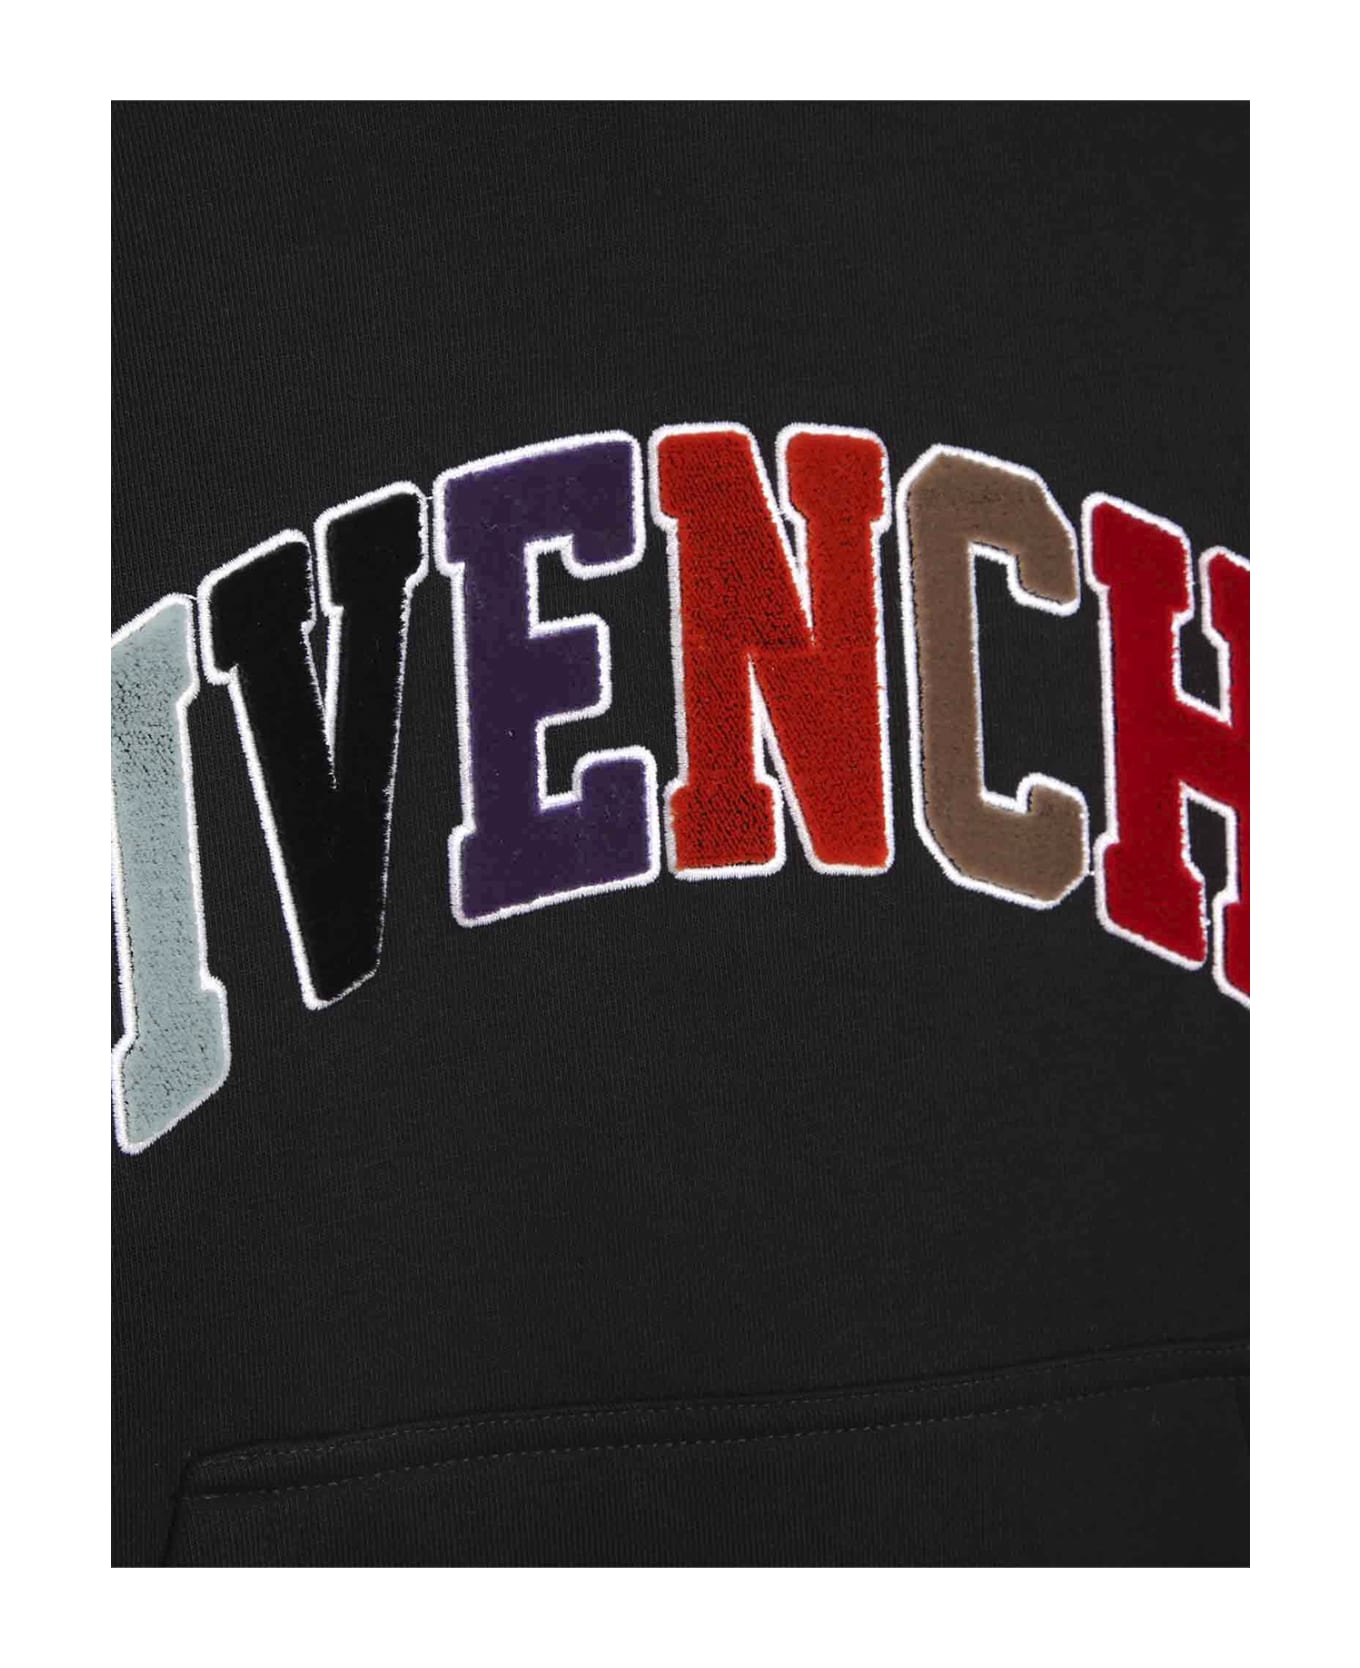 Givenchy Black Hoodie With Multicoloured Signature - B Nero